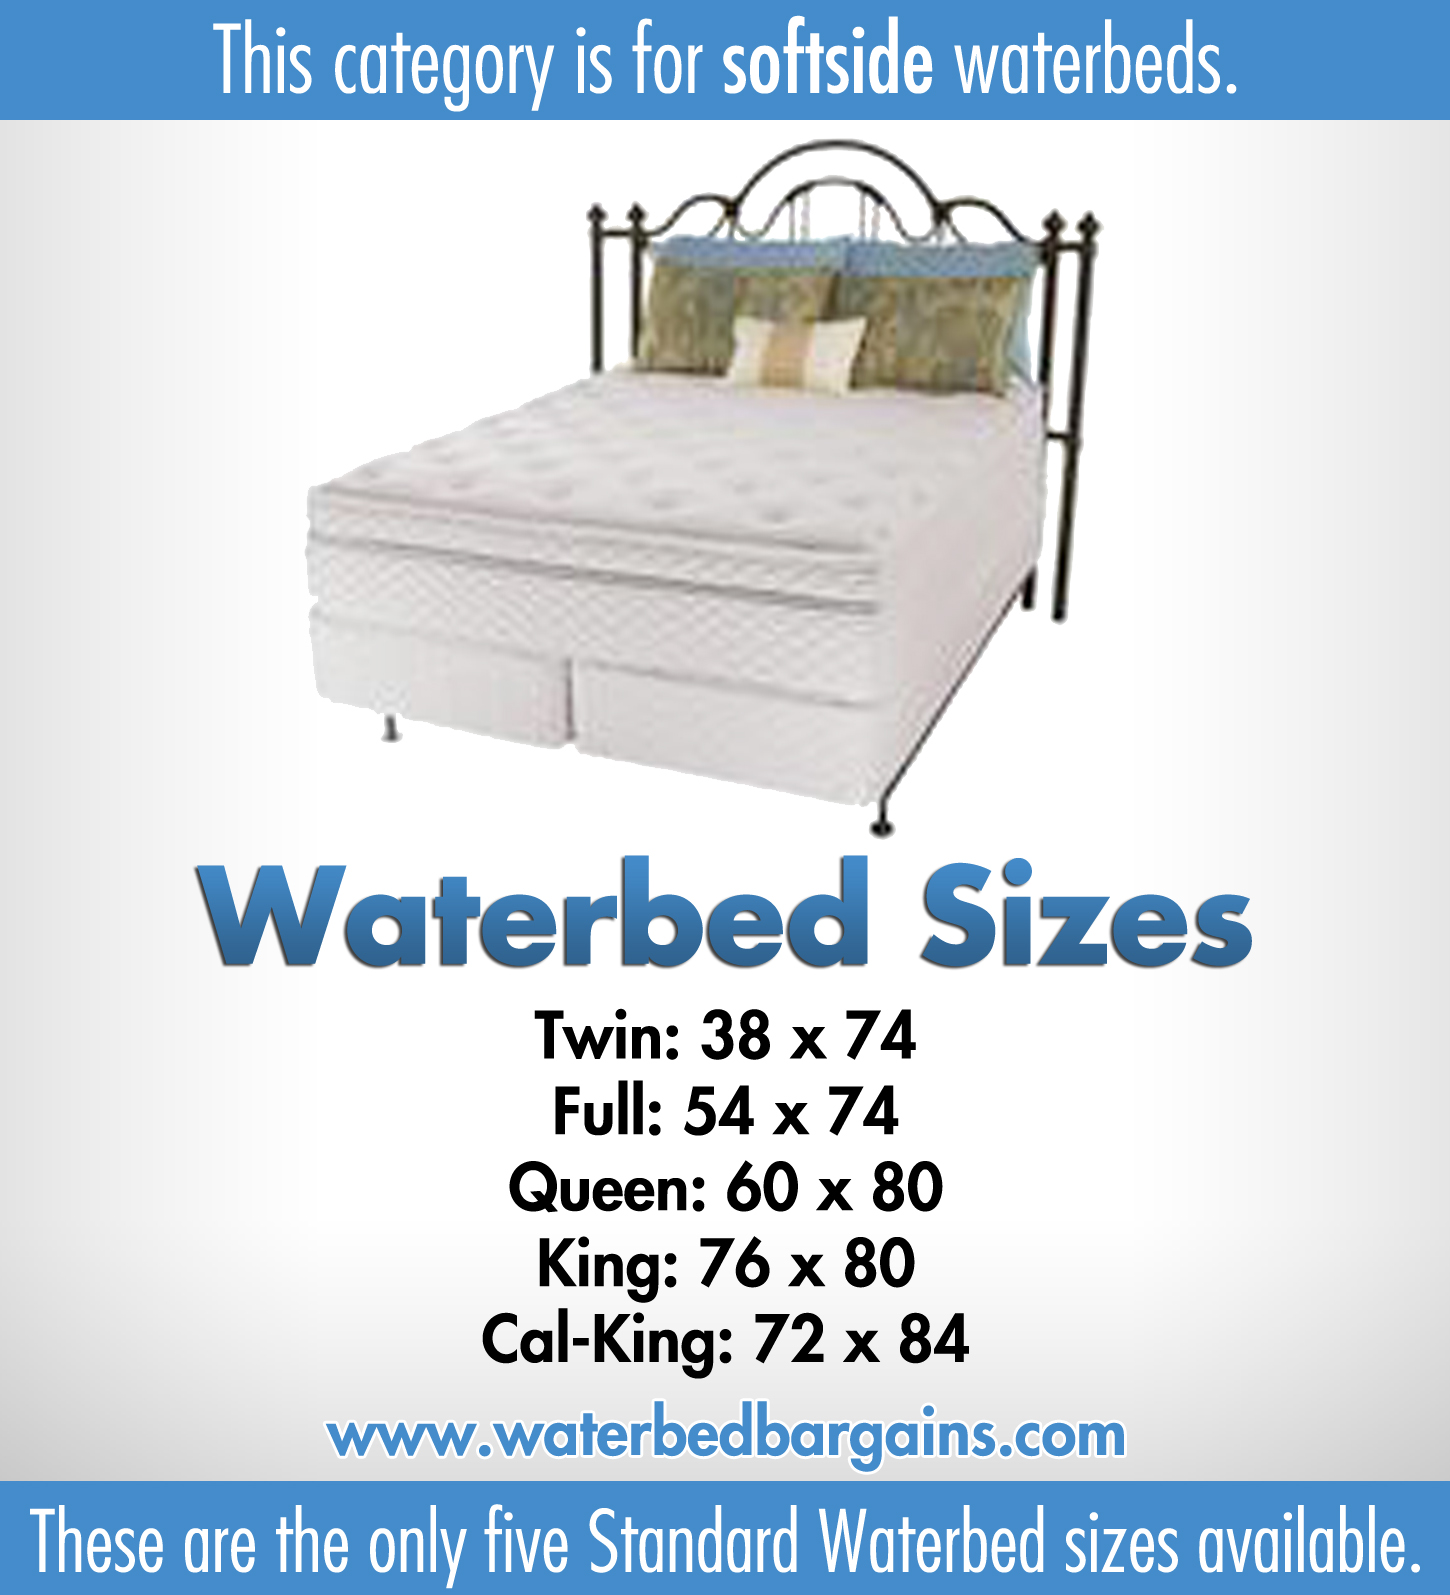 Softside waterbed | Waterbed with memory foam layer | Sizes: Super 